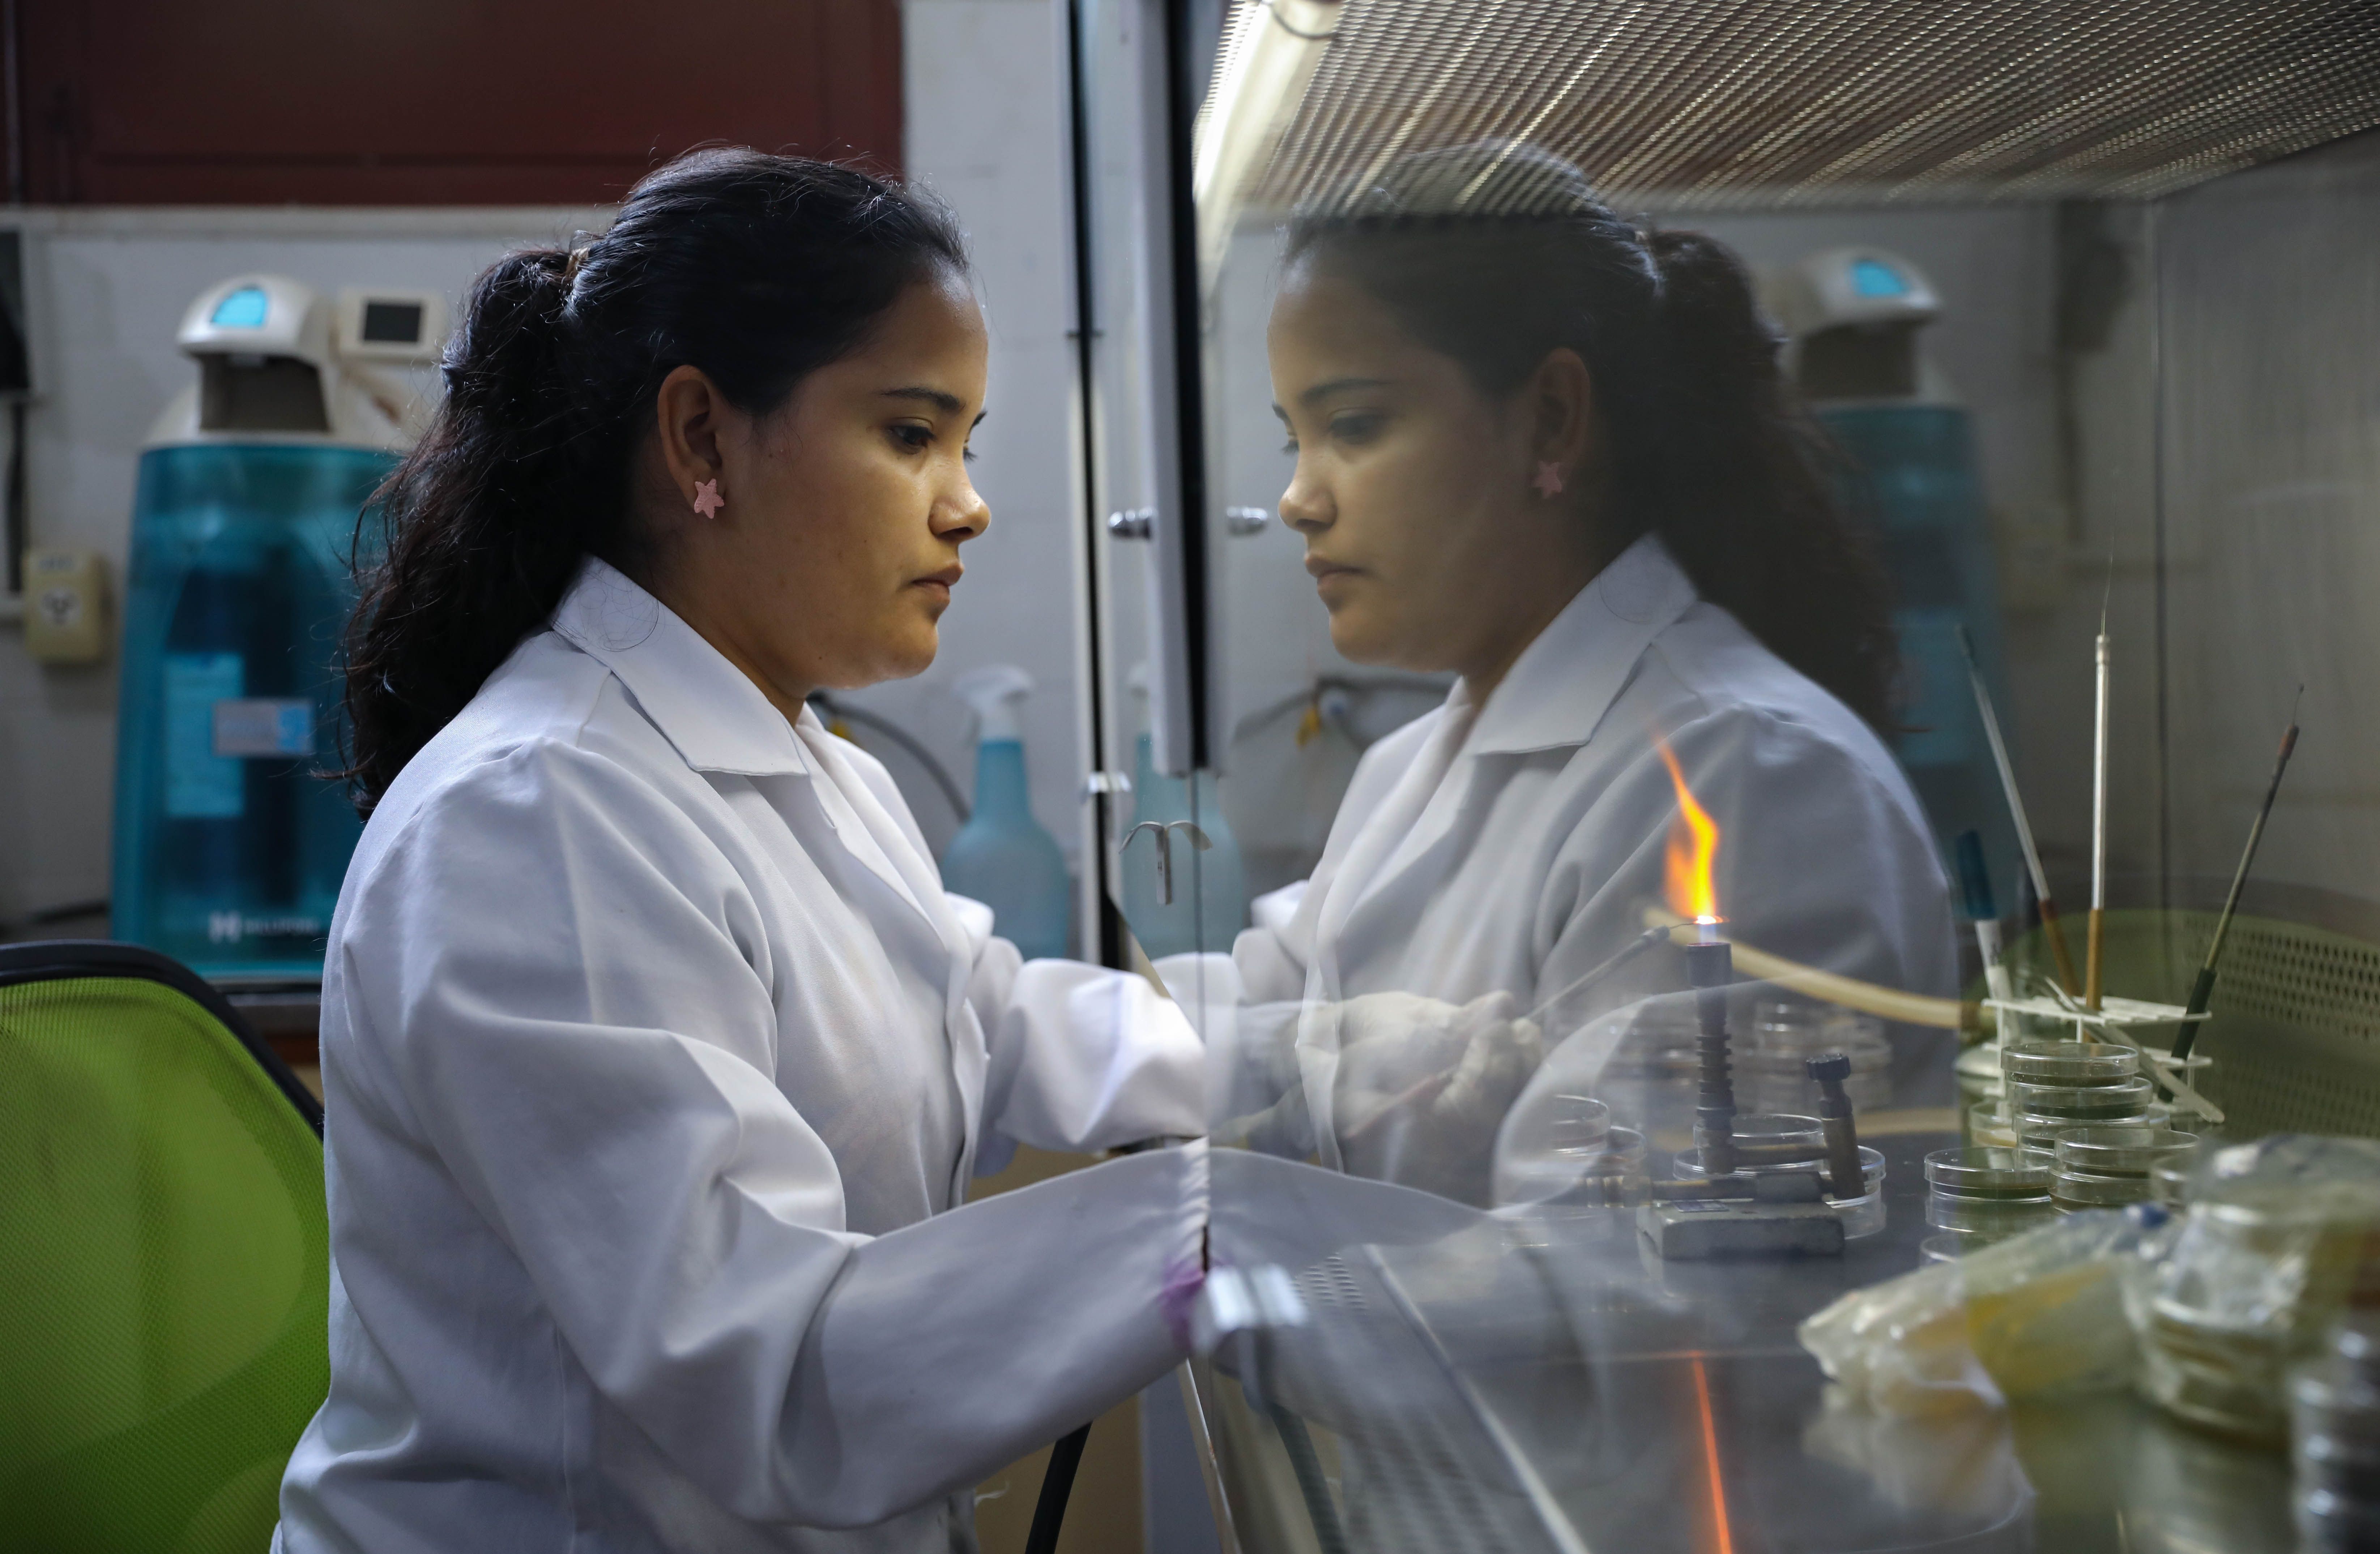 Naila Cruz, a biomedical doctorate student, uses a Bunsen burner to sterilize medical equipment used while studying mycobacterium leprae—the bacteria that causes leprosy—in the Laboratory of Dermatology-Immunology. Image by Anton L. Delgado. Brazil, 2020.